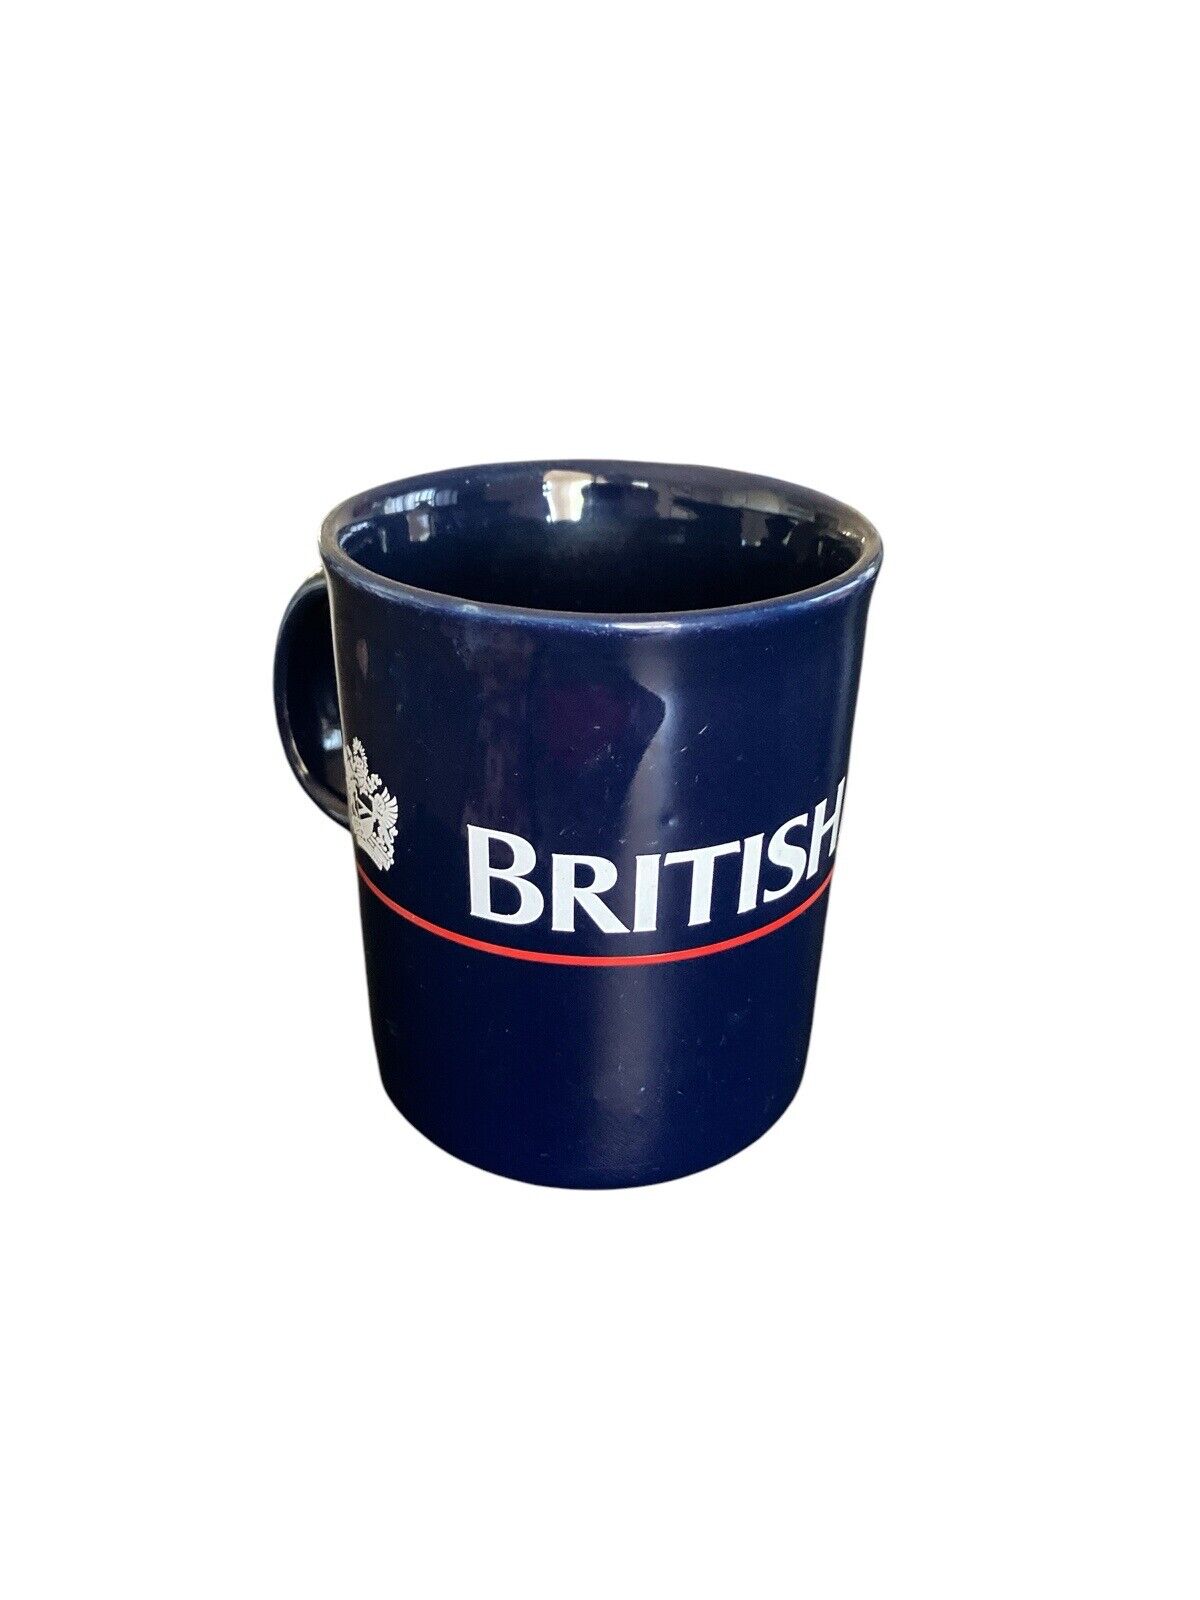 British Airways Blue Airlines Cup. Made In England